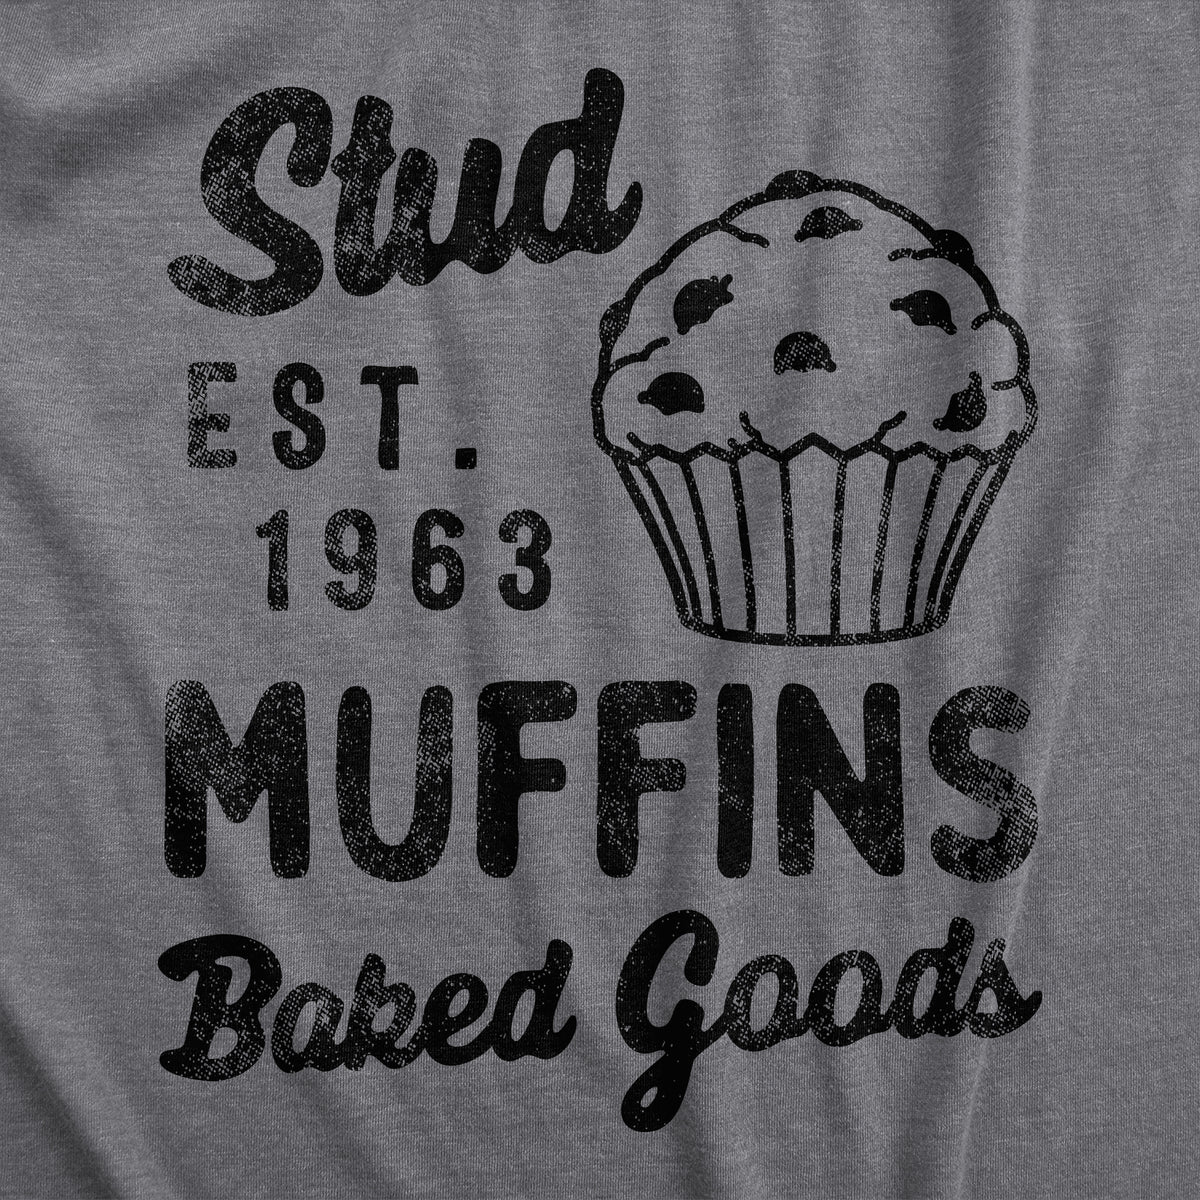 Stud Muffins Baked Goods Youth Tshirt